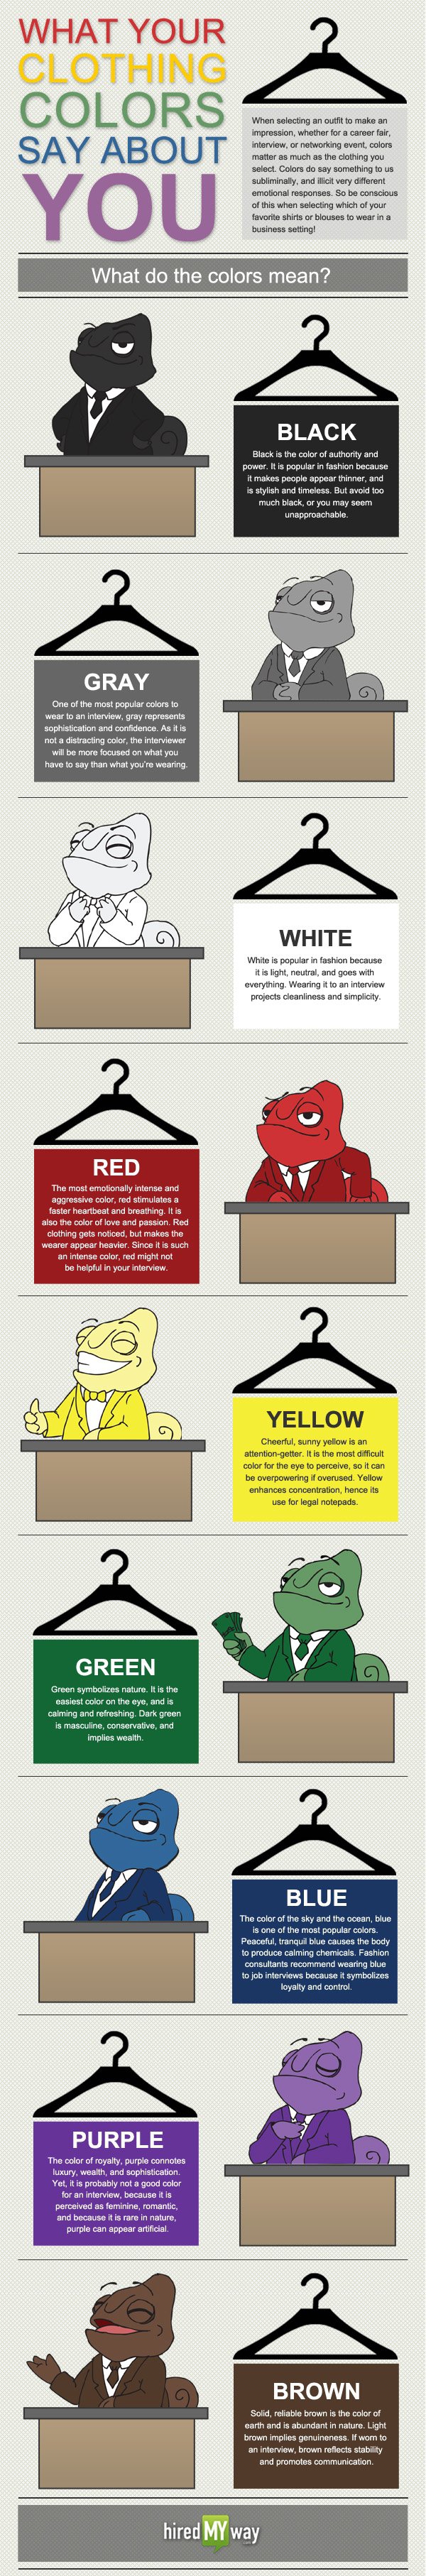 What Your Clothing Colors Say about You